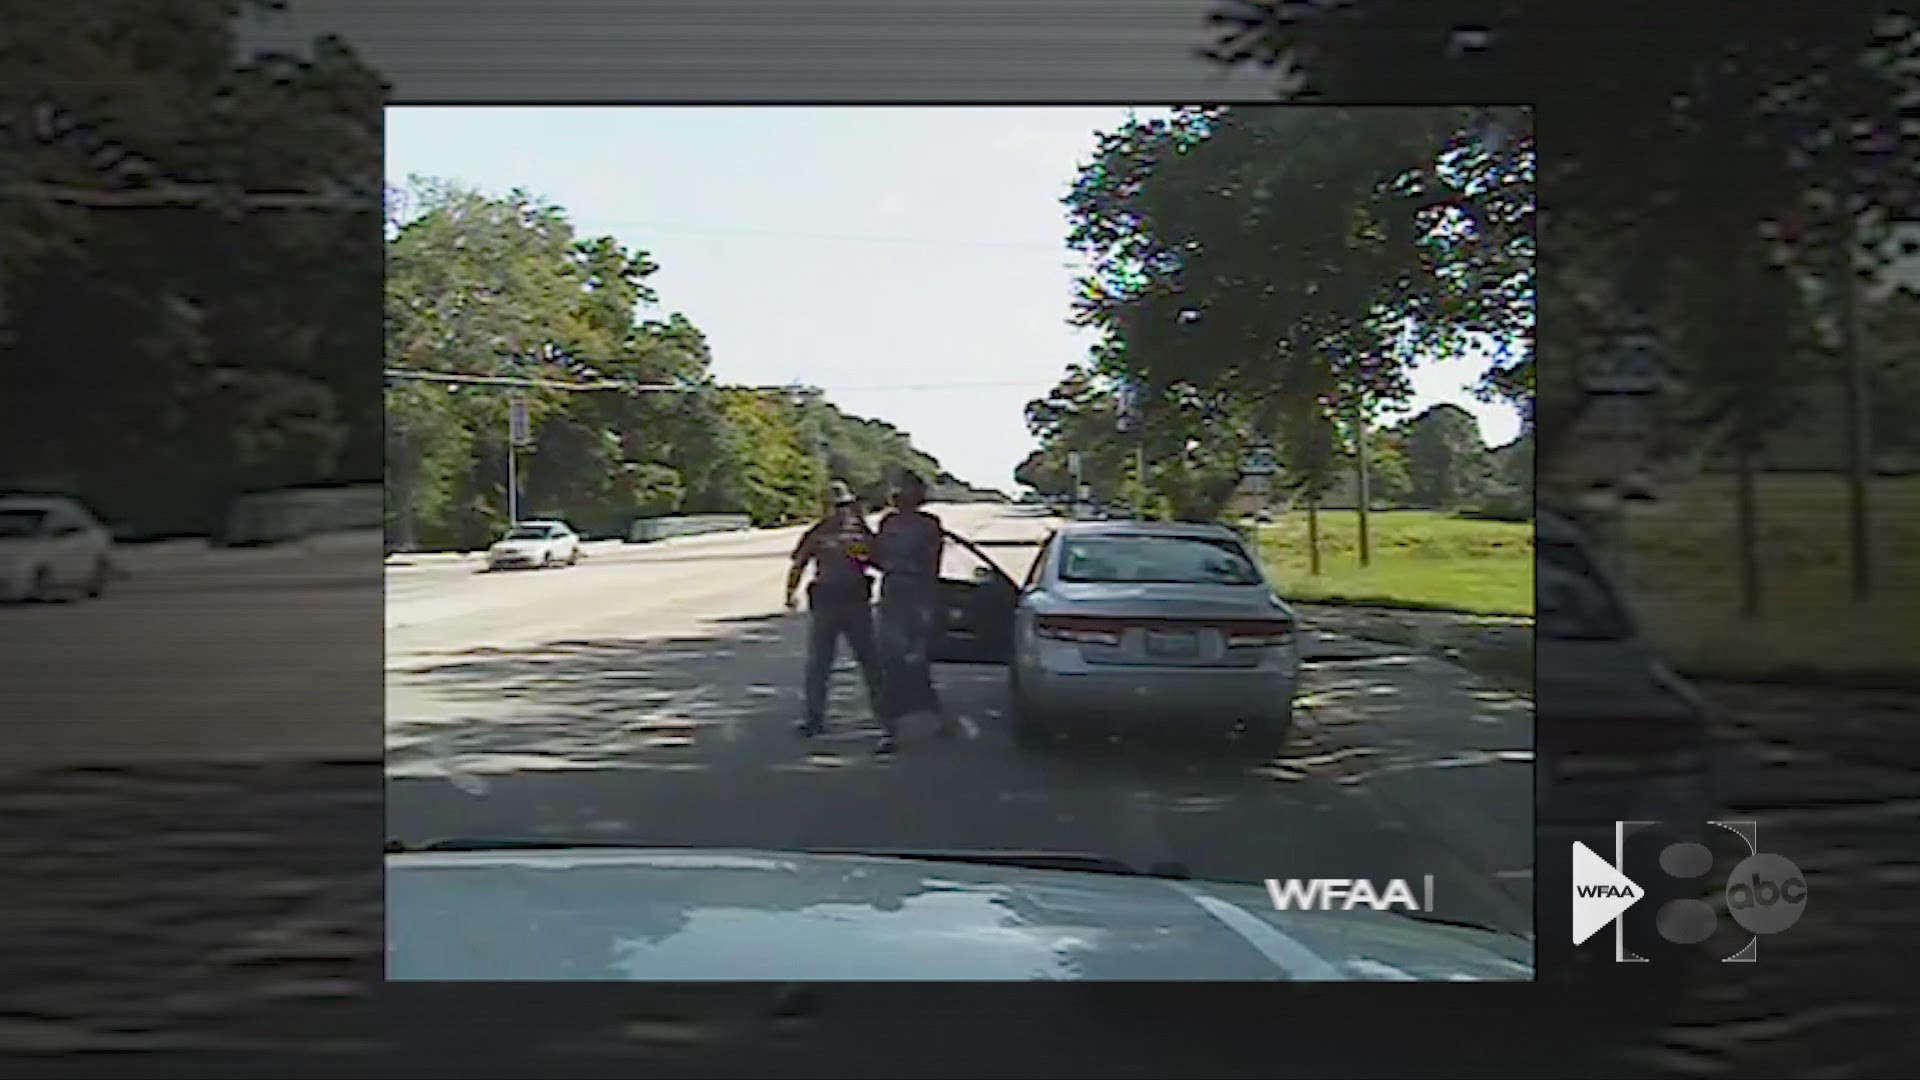 The family of Sandra Bland -- who died in a Waller County jail cell -- is calling for a re-opening of the criminal investigation into Bland's arrest and death after seeing footage for the first time. Watch now, more at 10 p.m.